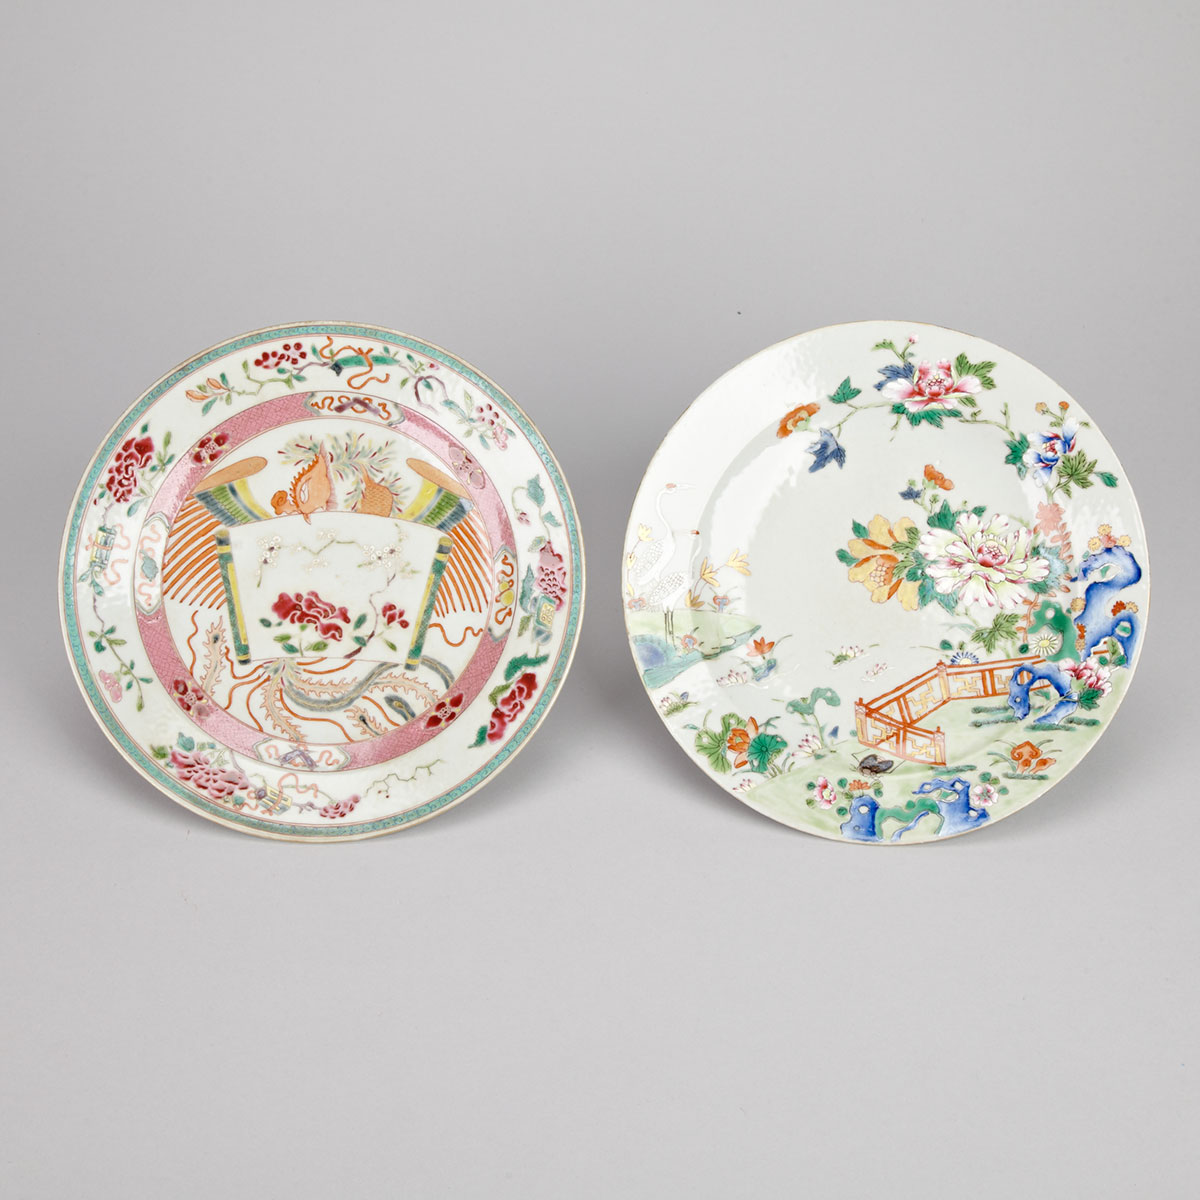 Two Export Famille Rose Dishes, 19th Century